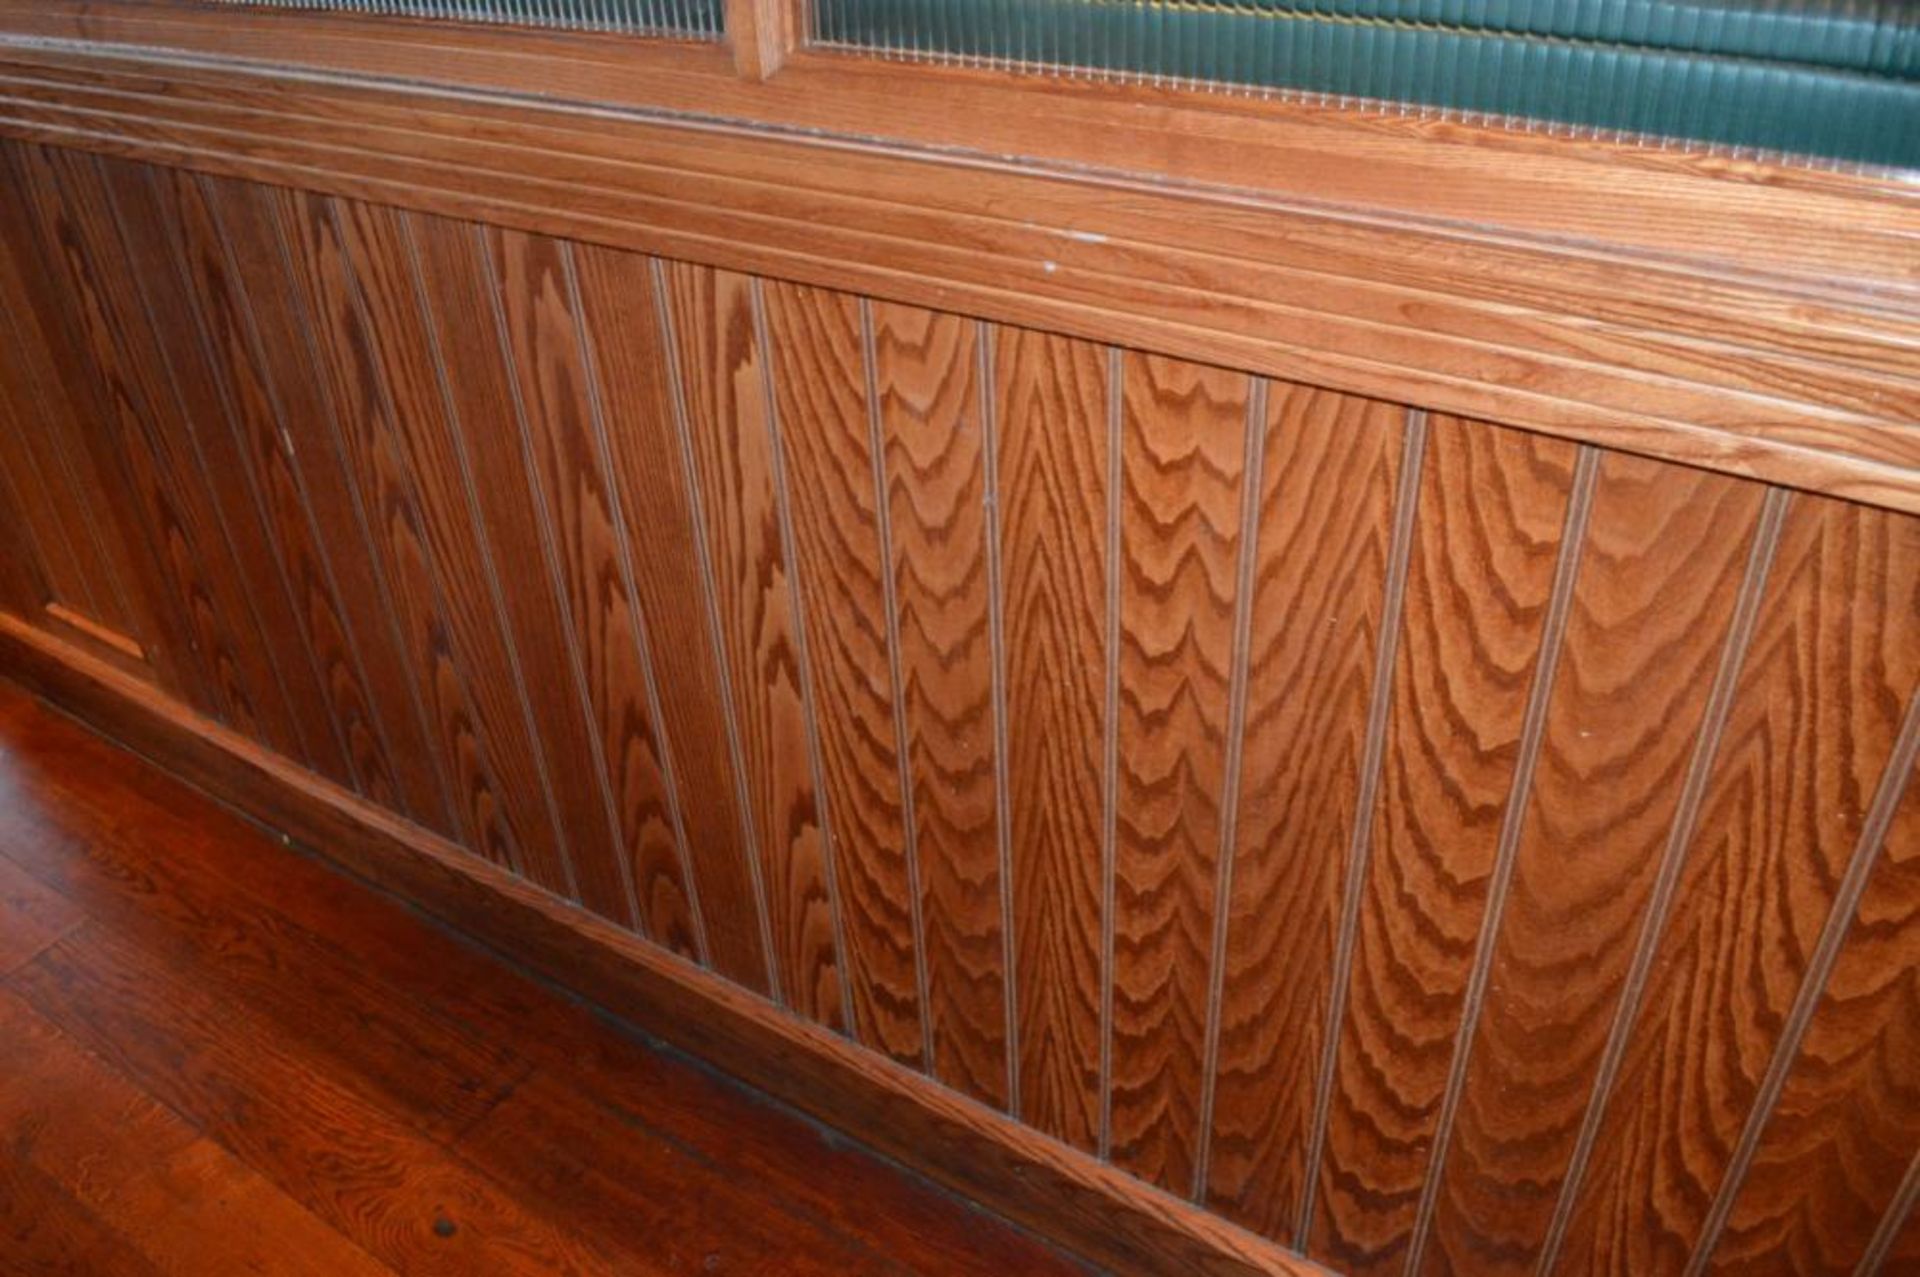 1 x Bar Restaurant Room Partition With Seating Bench, Pillar, Wine Cabinet and Foot Rest - Overall S - Image 14 of 21